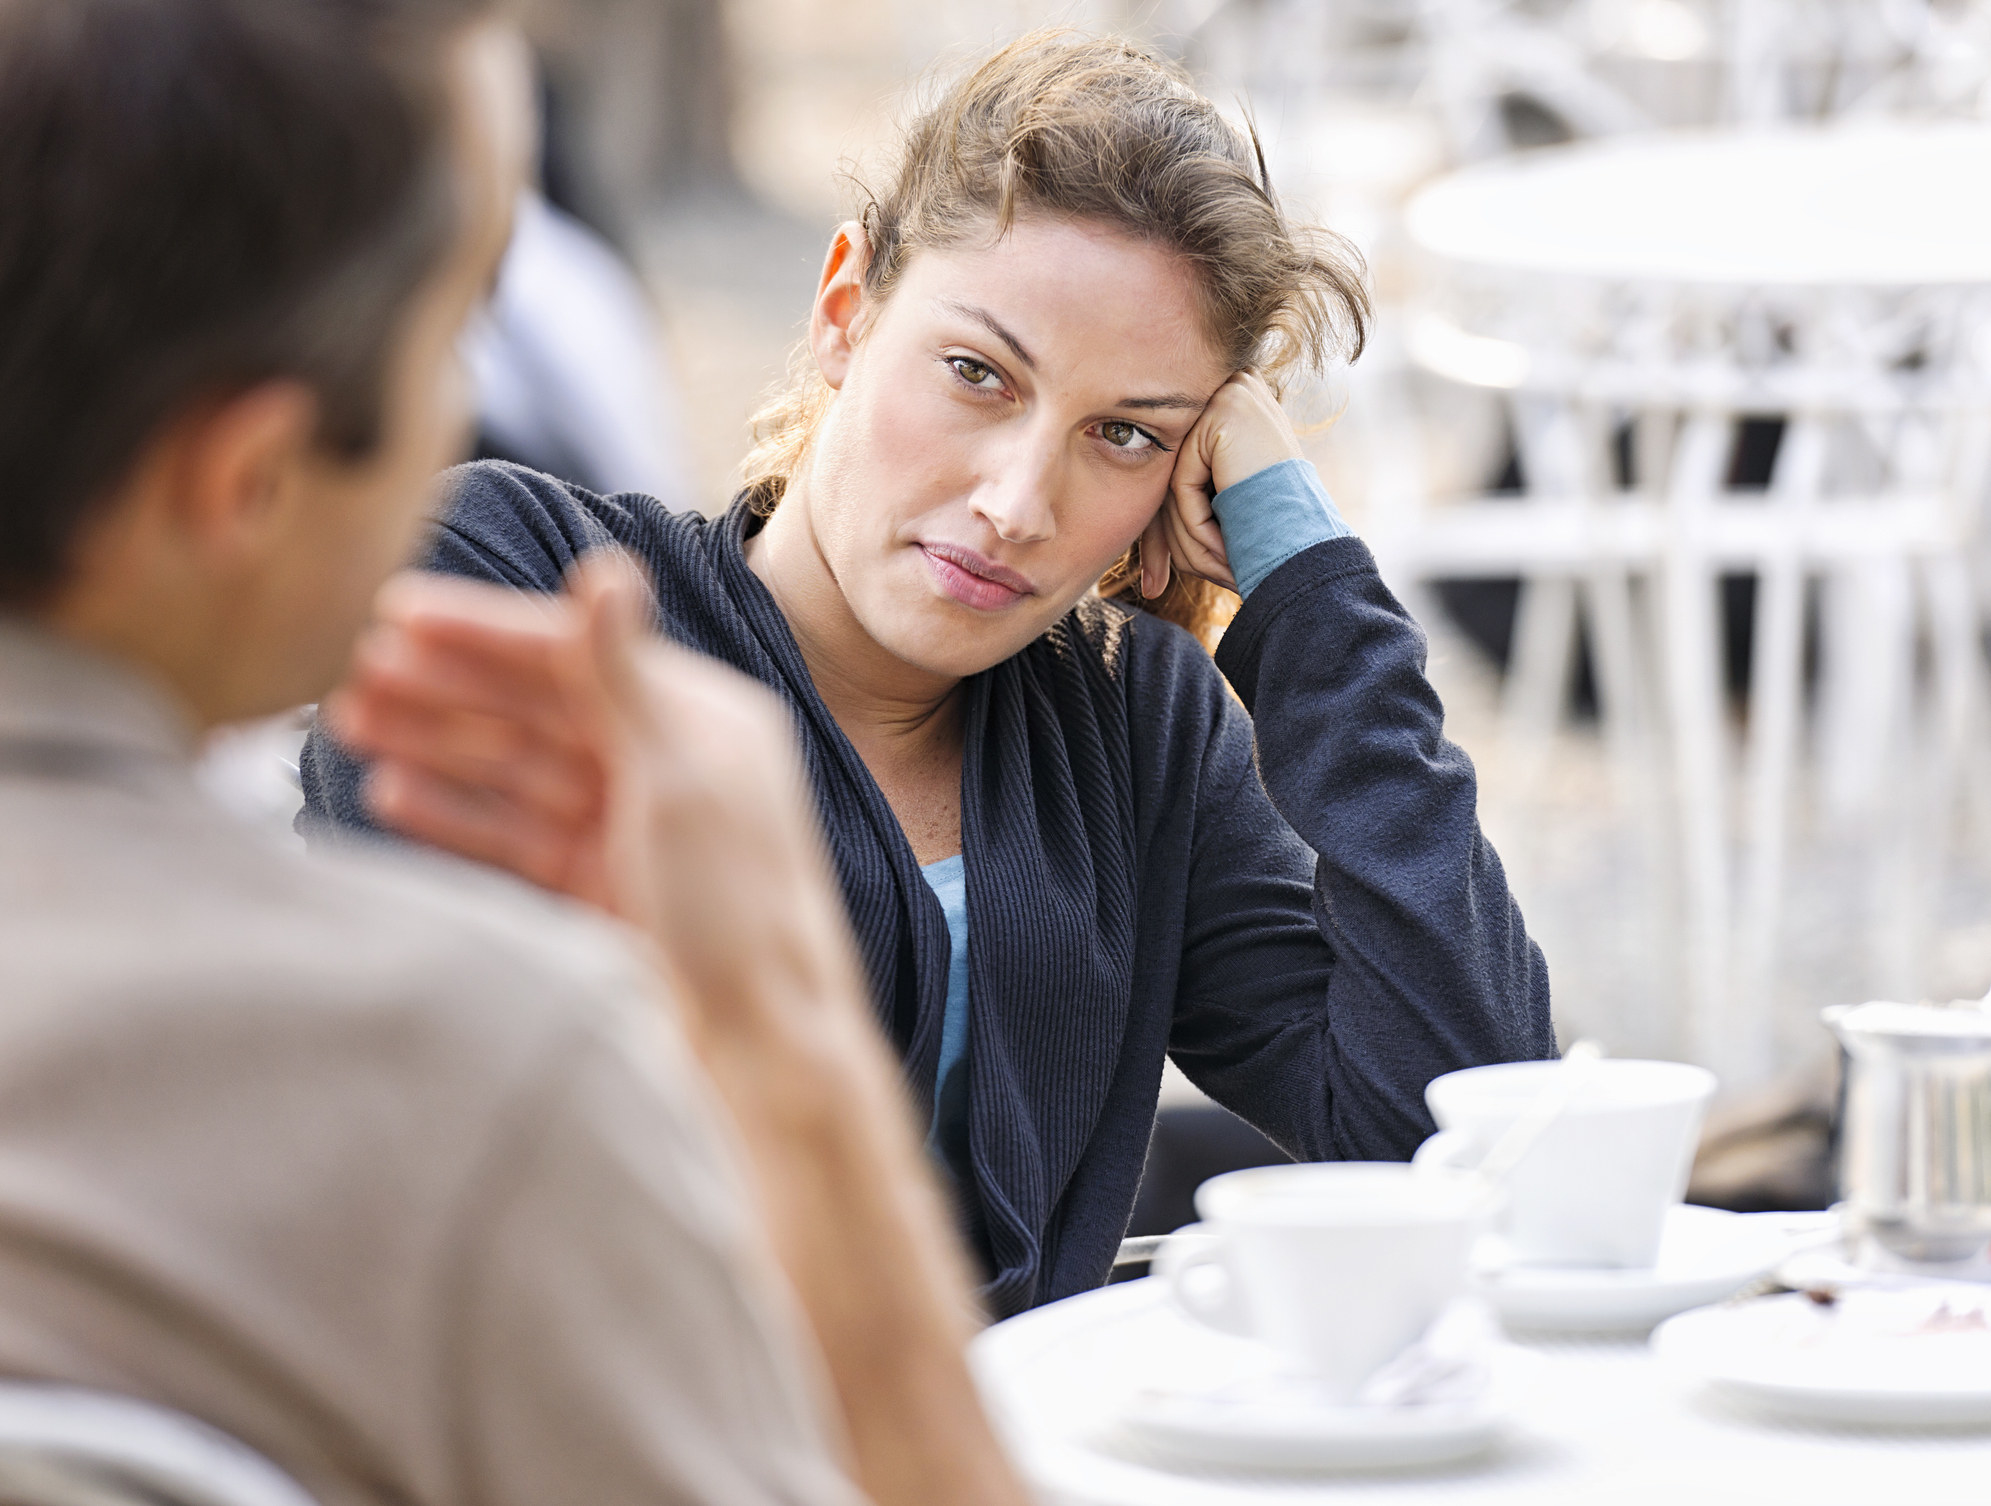 A woman looking bored while having a conversation